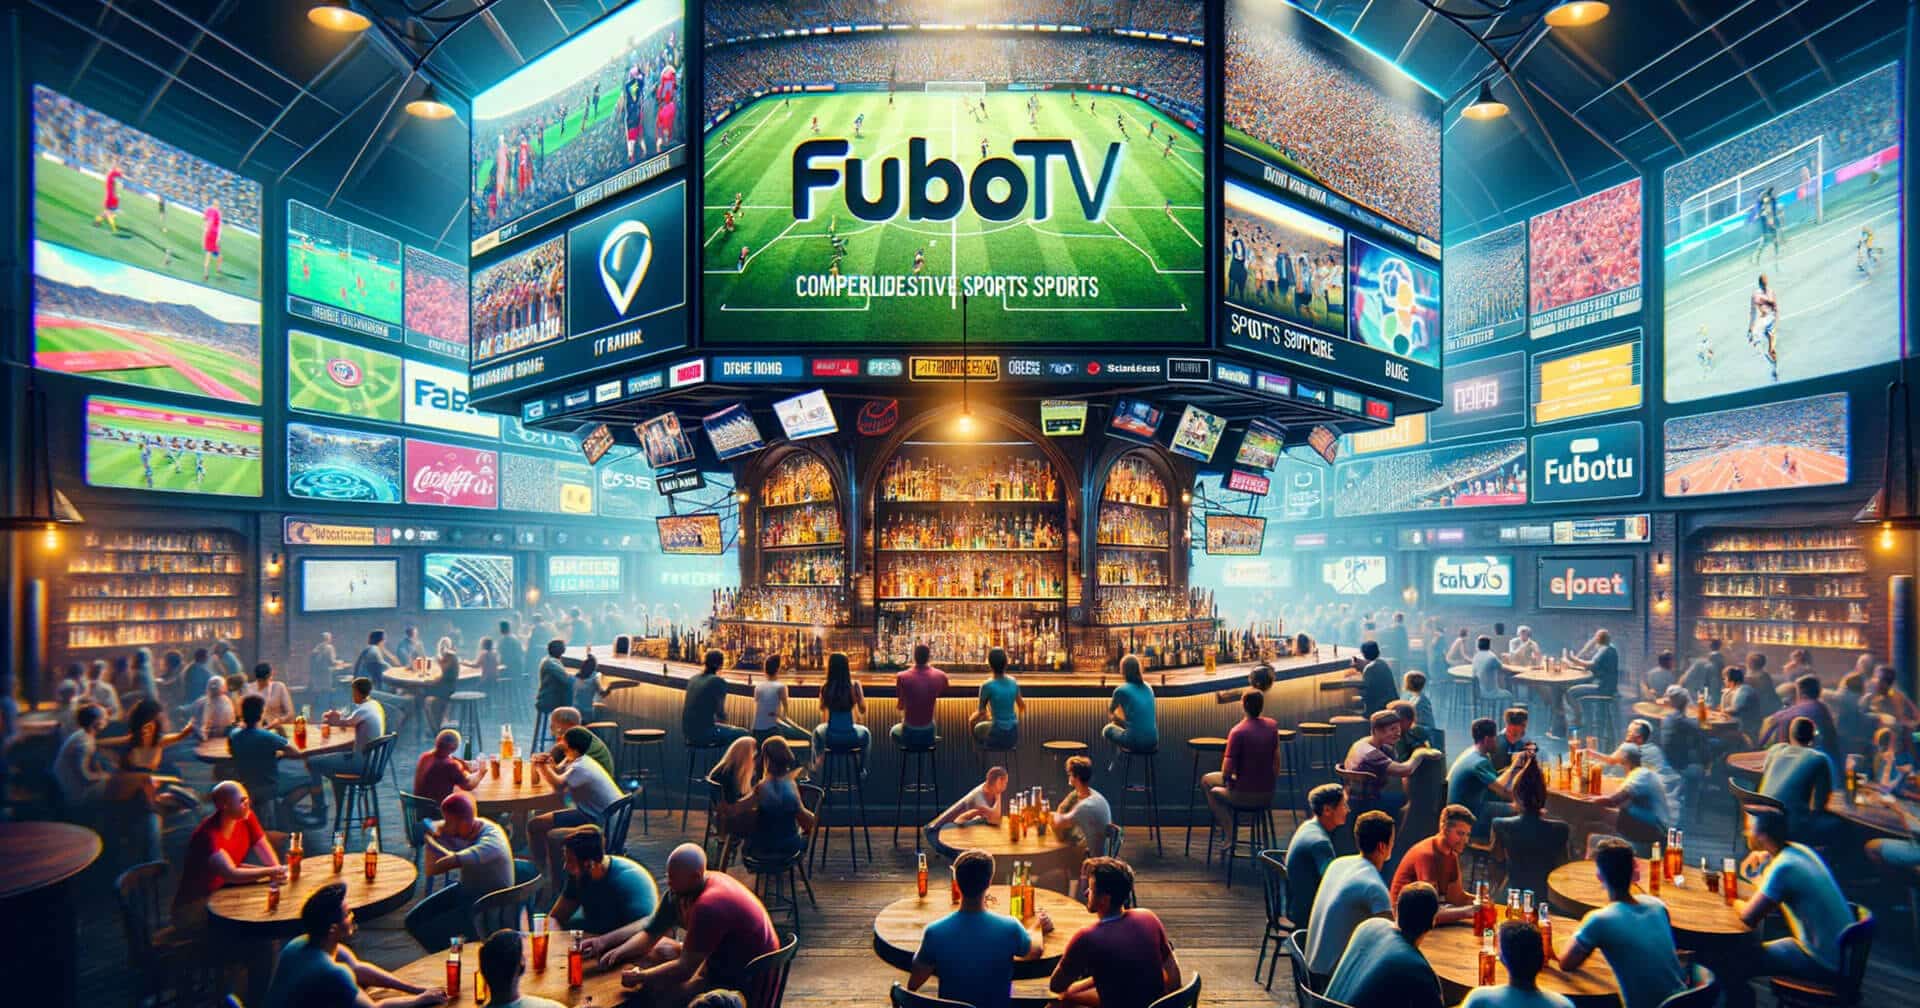 Fubo tv is a sports bar with many people sitting at tables.